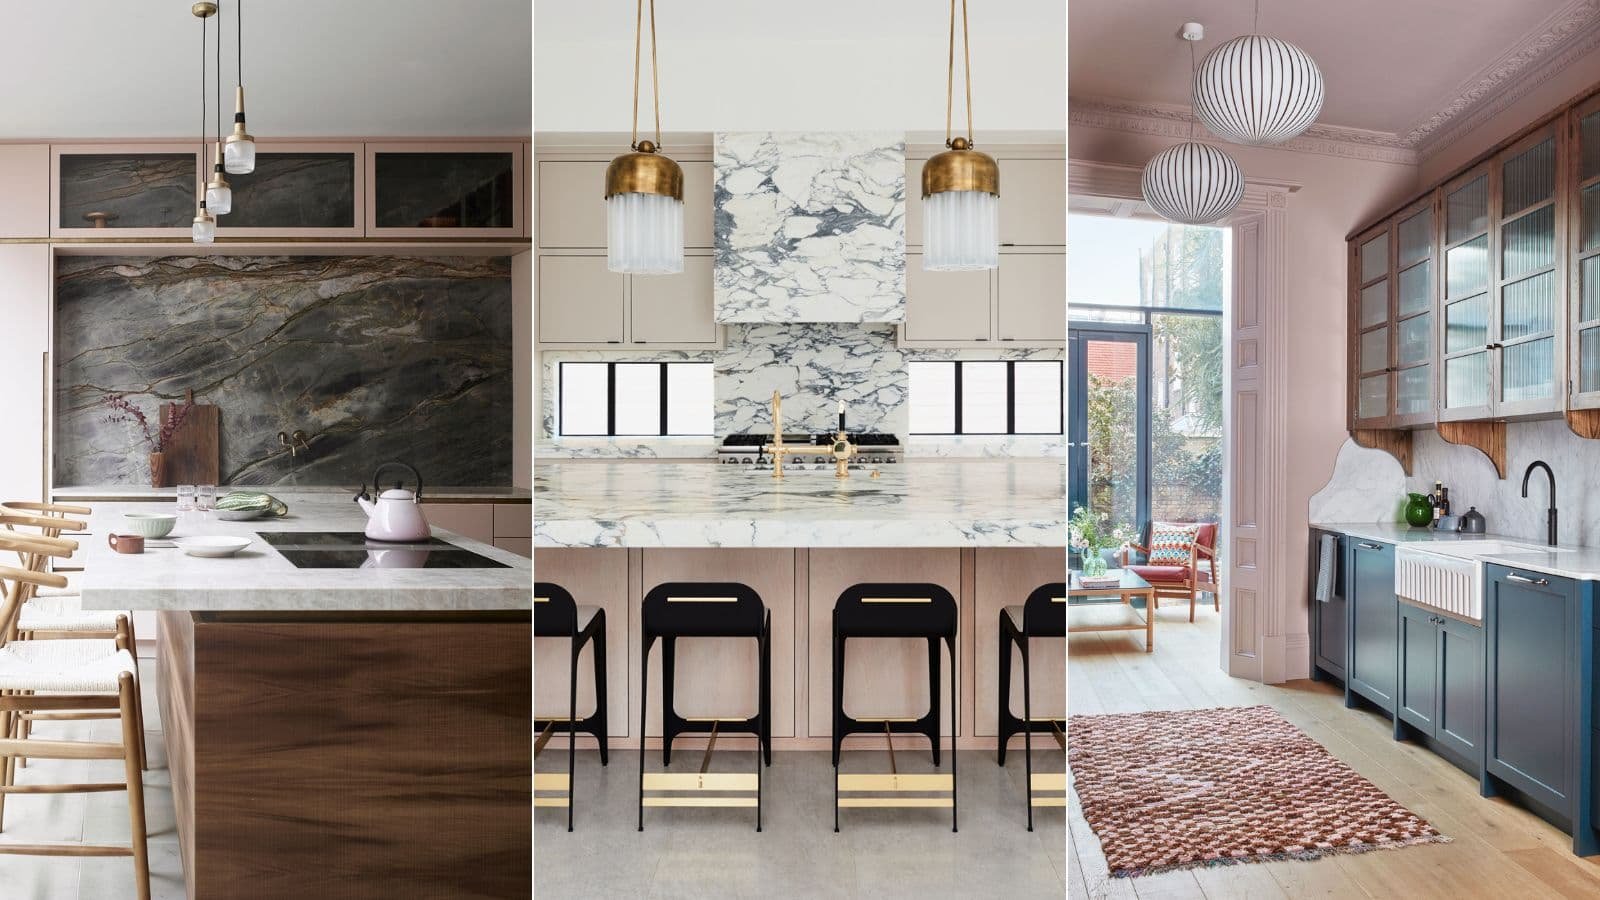 15 Insanely Chic Pink Kitchen Ideas That Prove Pink is ALWAYS a Good Idea